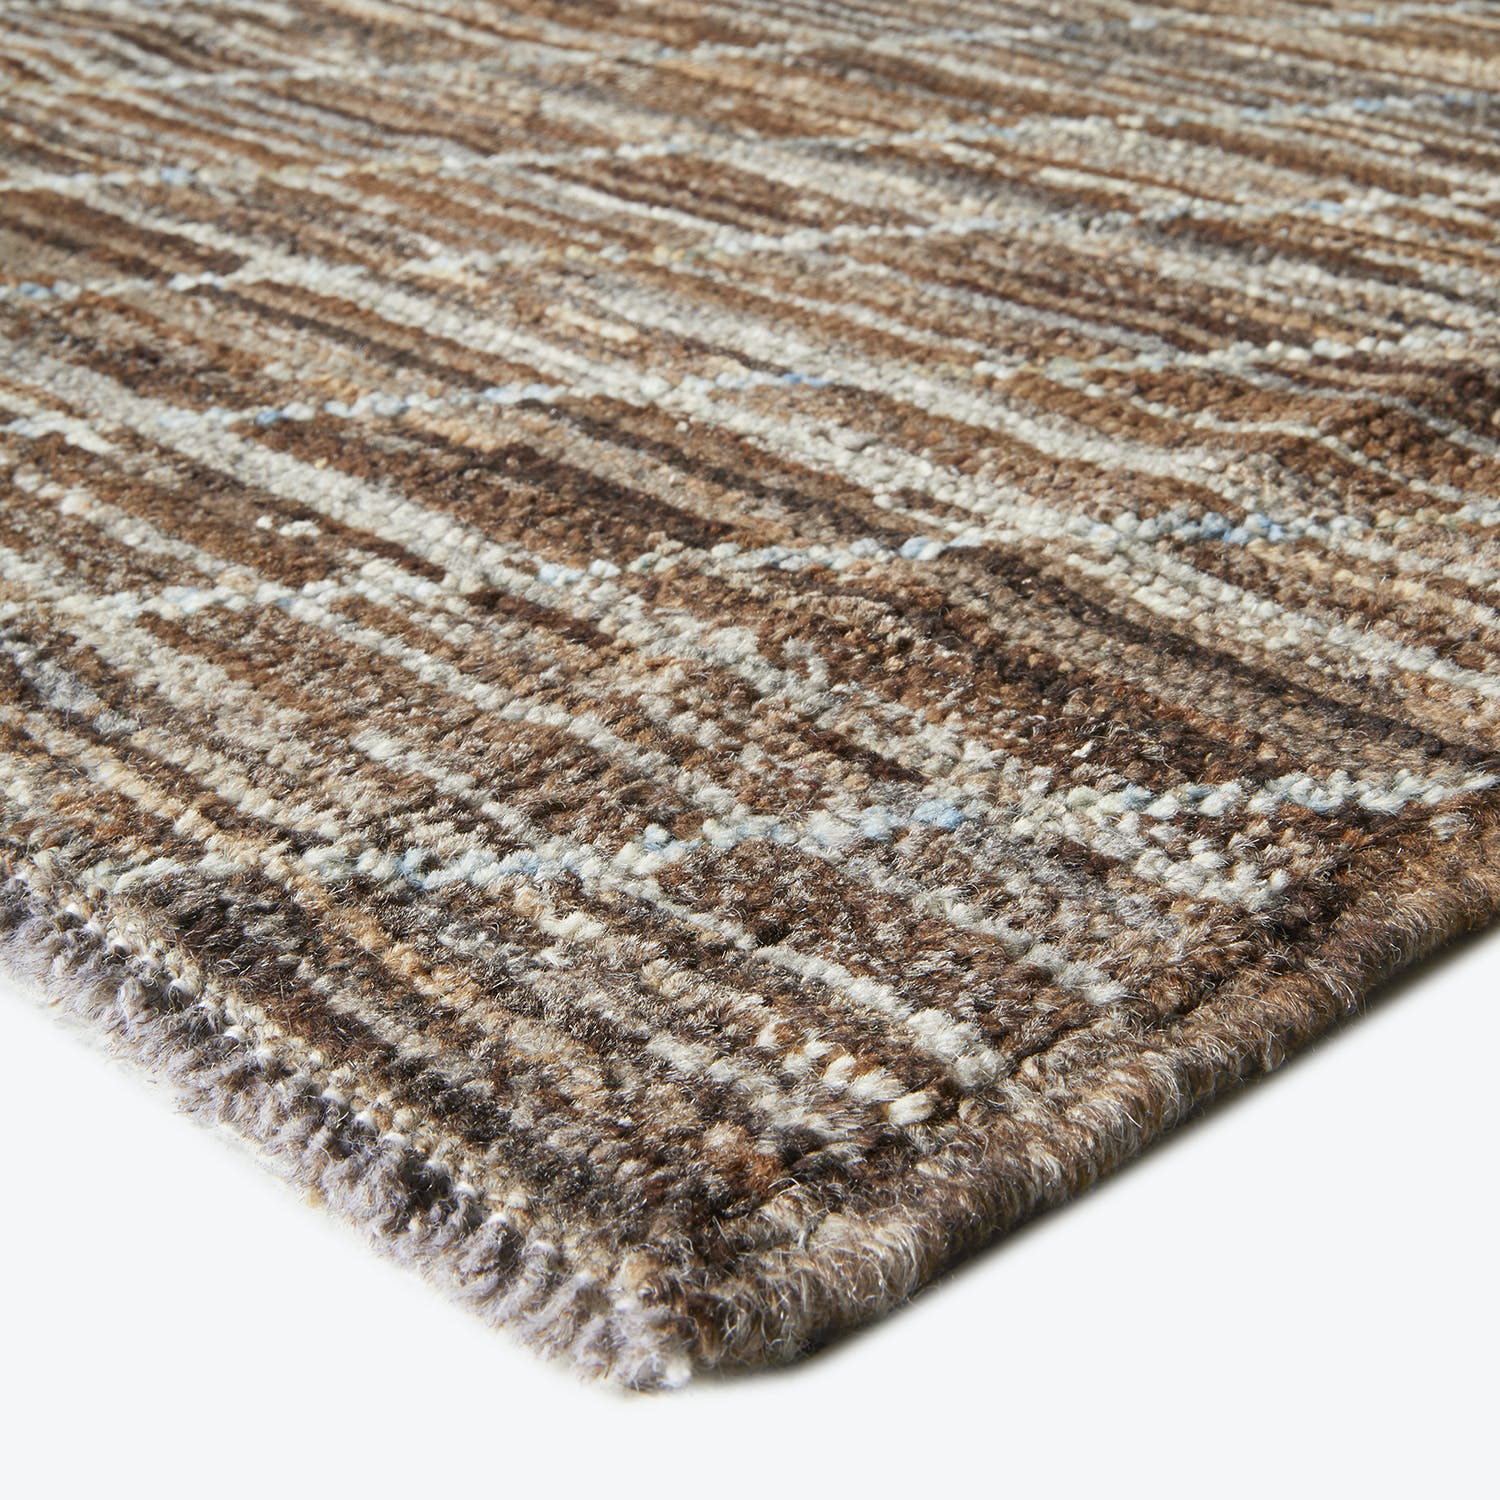 Close-up view of a plush striped rug with earthy tones.